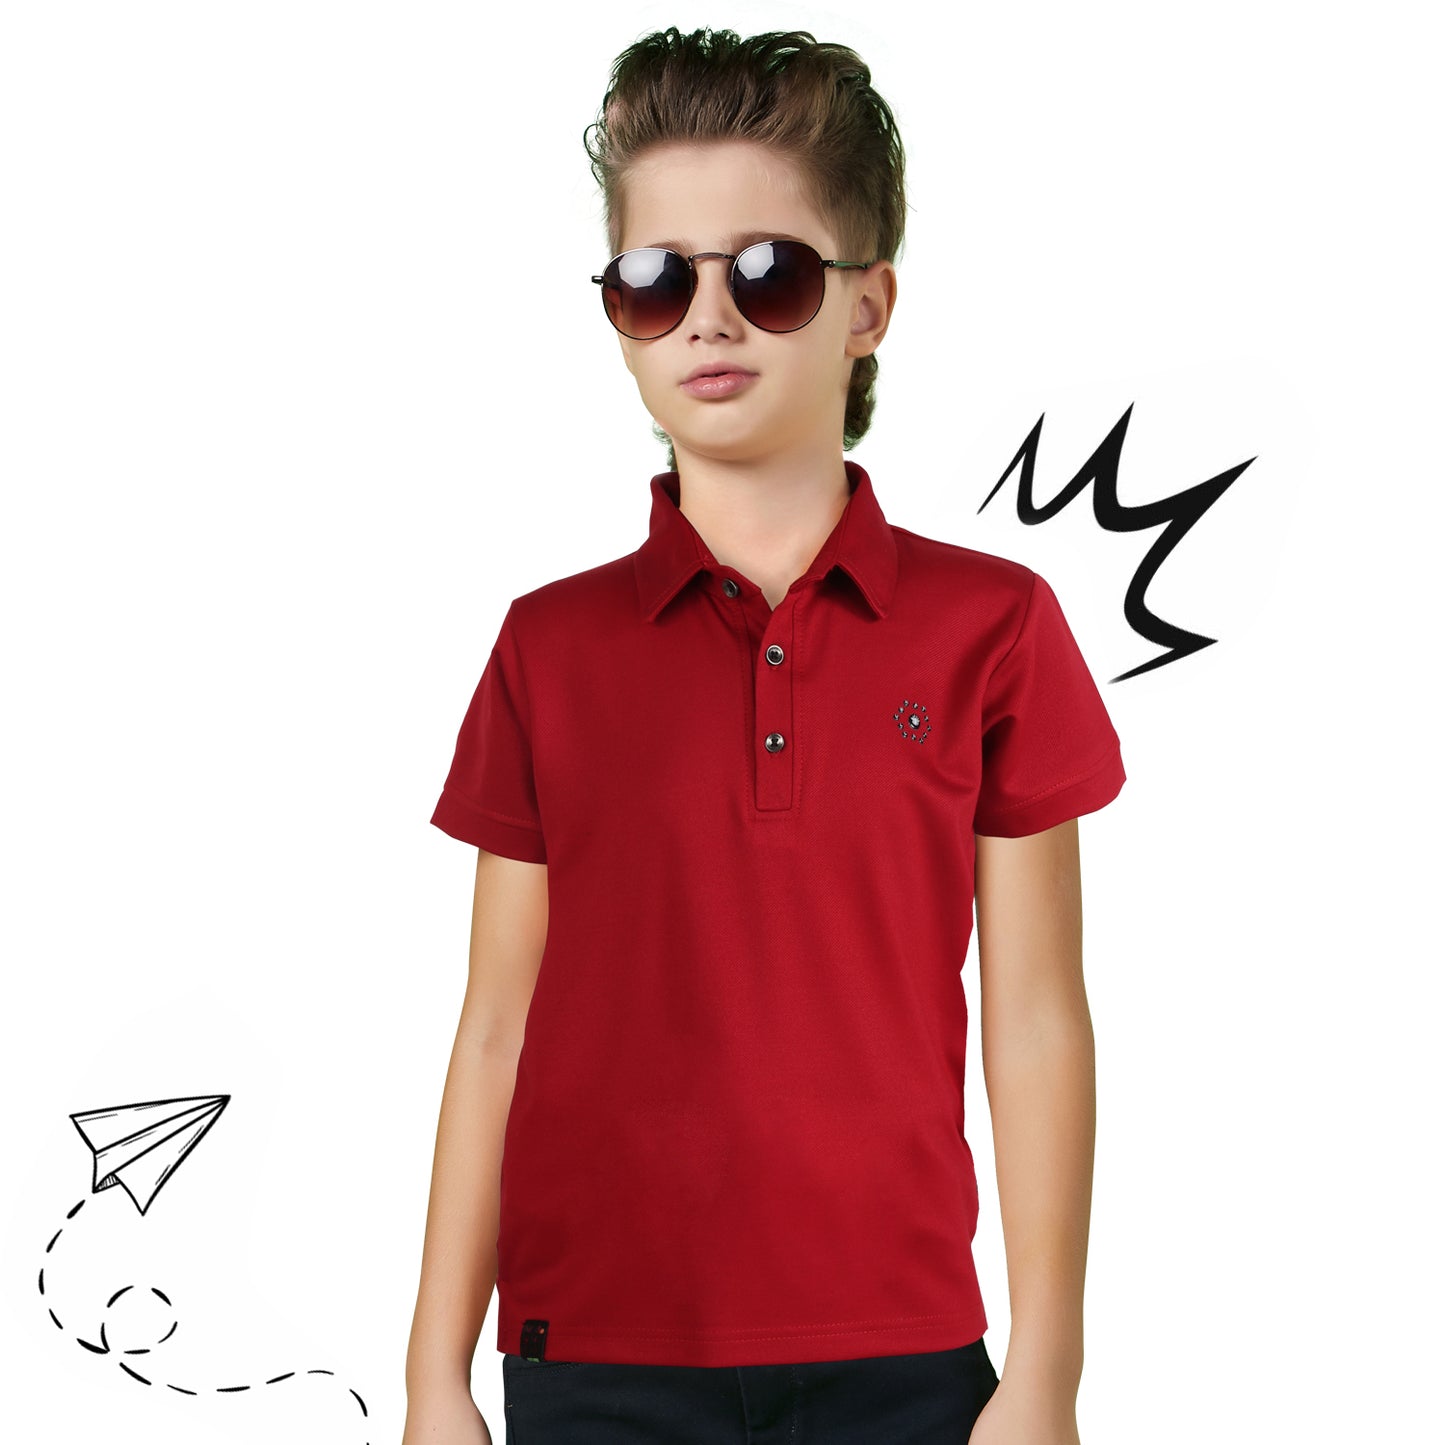 Redefine Casual Cool: Boys' Polo - Where Comfort Meets Style!